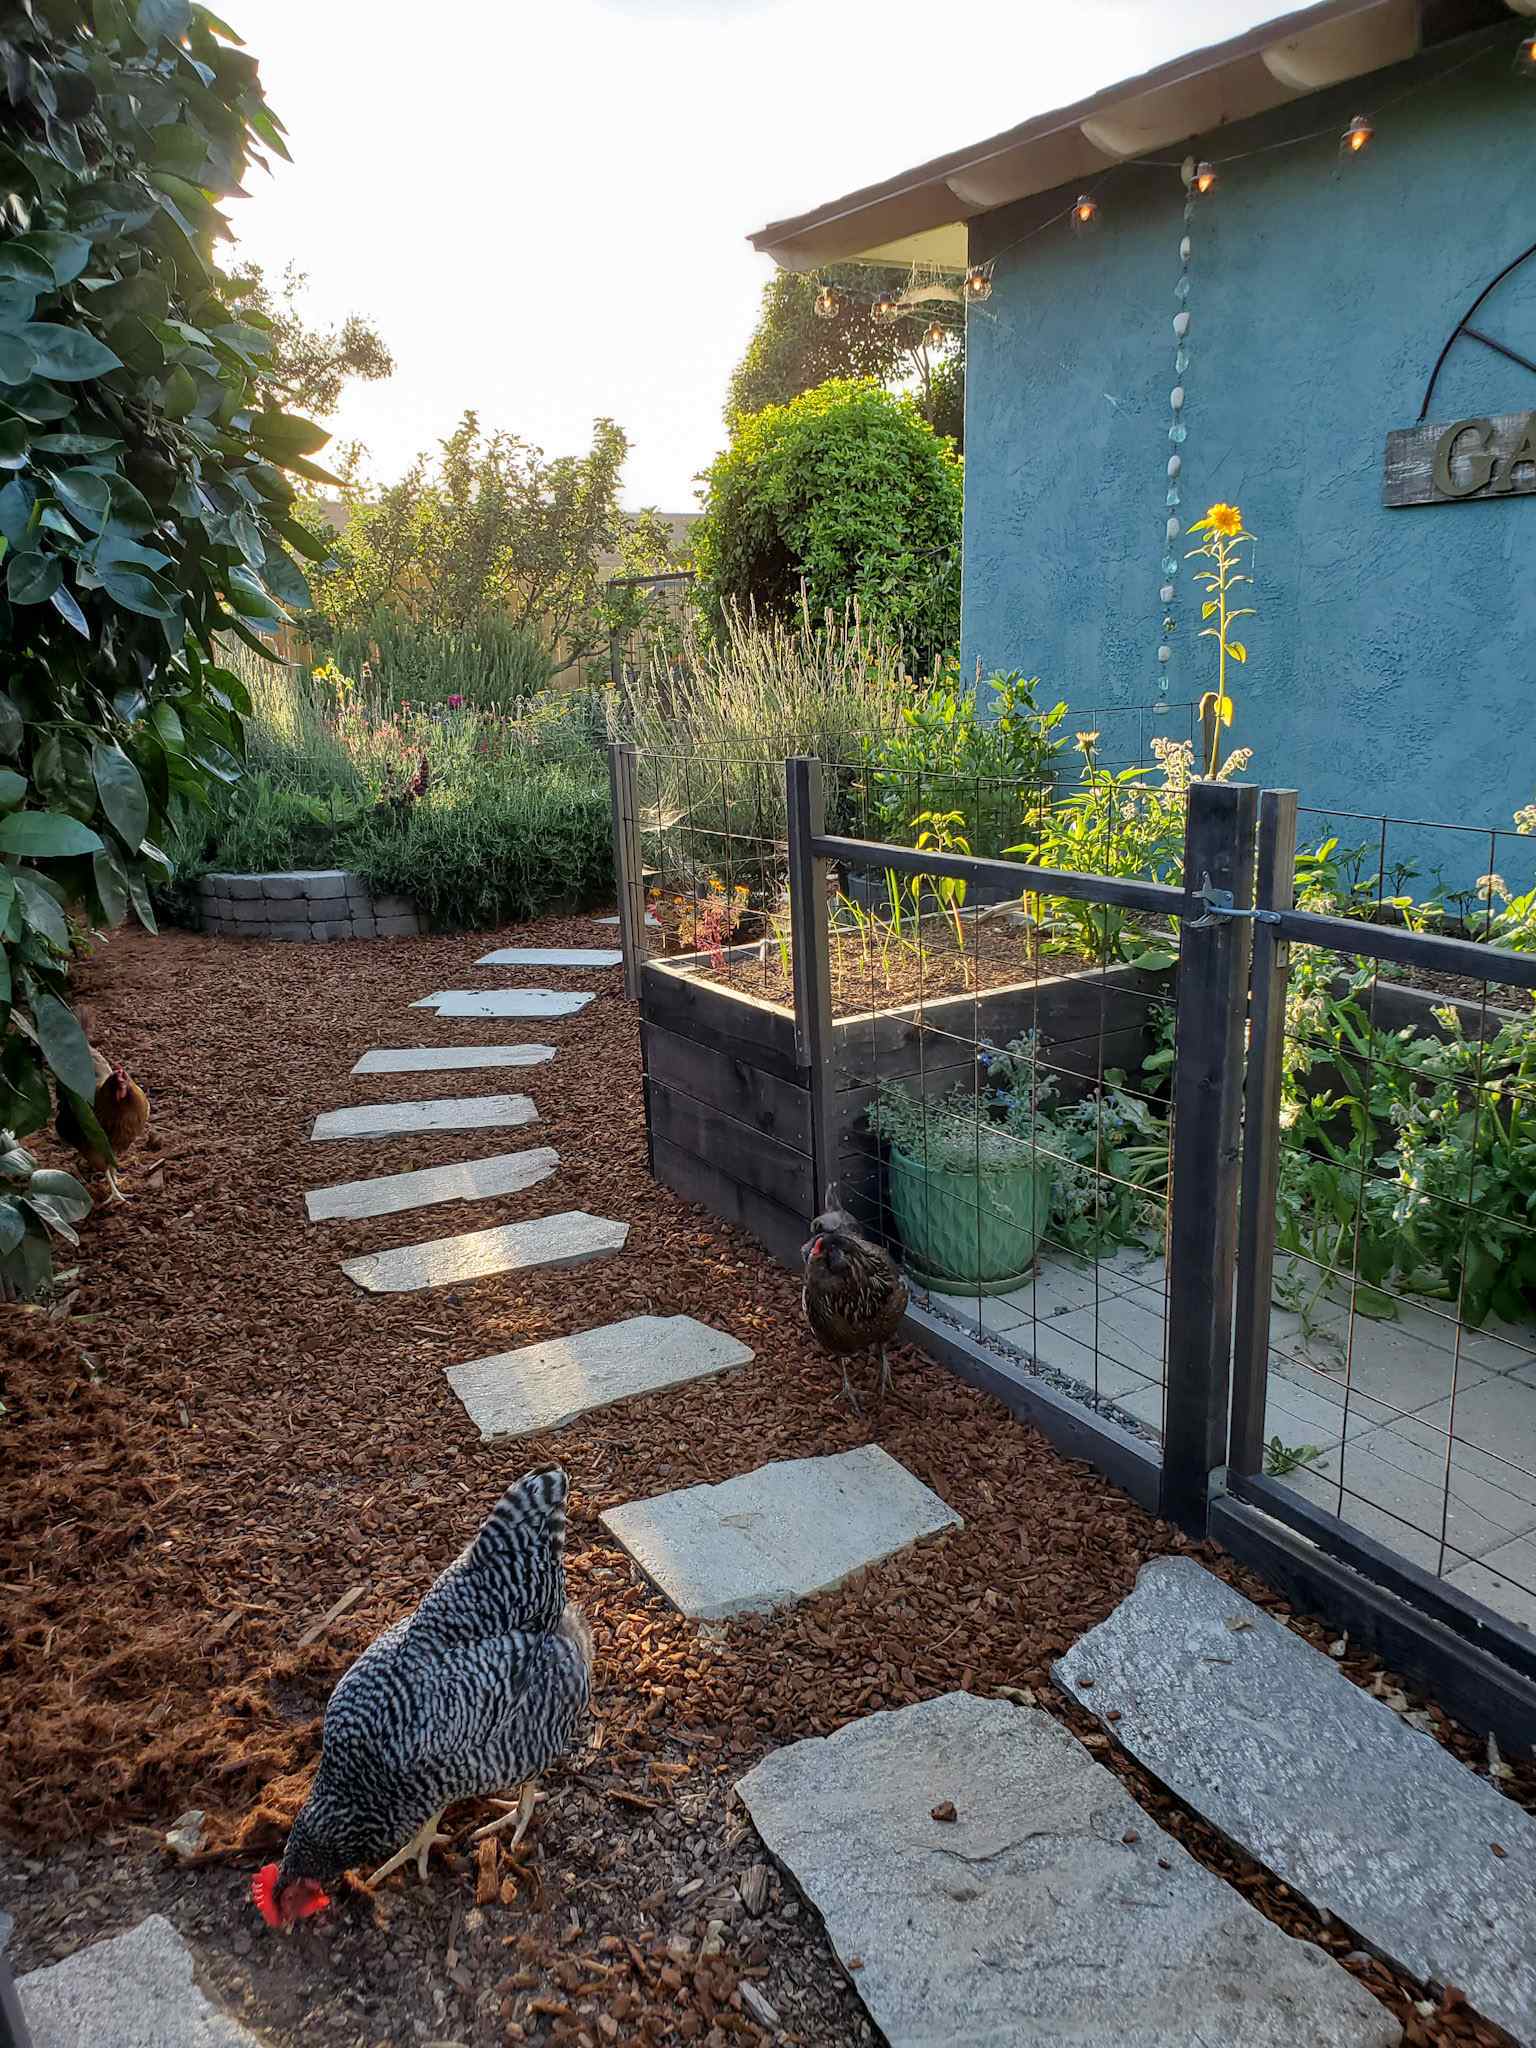 A backyard image showing a pathway weaving towards the coop garden, there are two chickens standing in the near foreground. The yard has been mulched with fresh redwood bark and shredded redwood mulch up until the very bottom of the image which still shows some older garden mulch that is darker brown after losing its reddish brown color with time. 